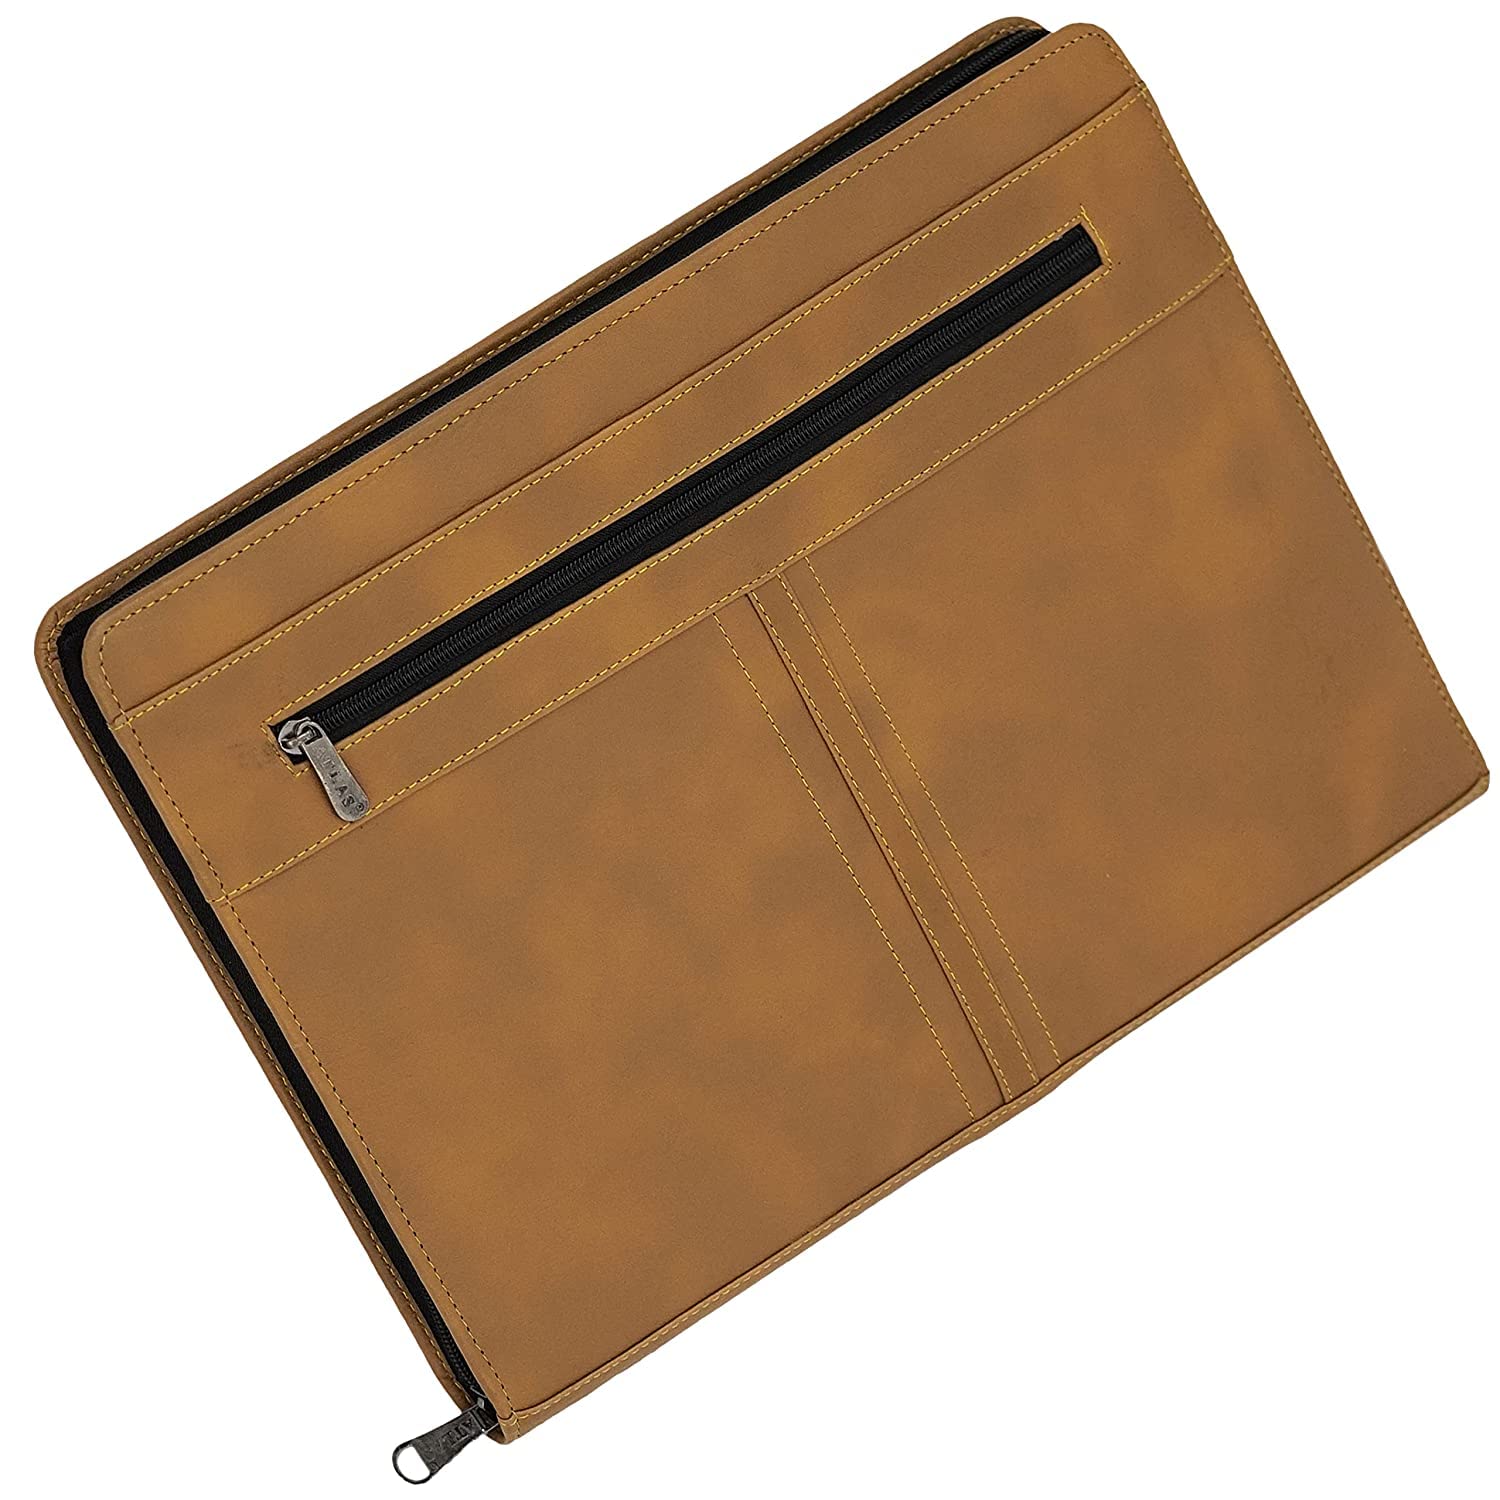 NJ Leatherette Material Professional File Folder for Documents, Conference Folder, File with 10 Leafs - Brown Colour